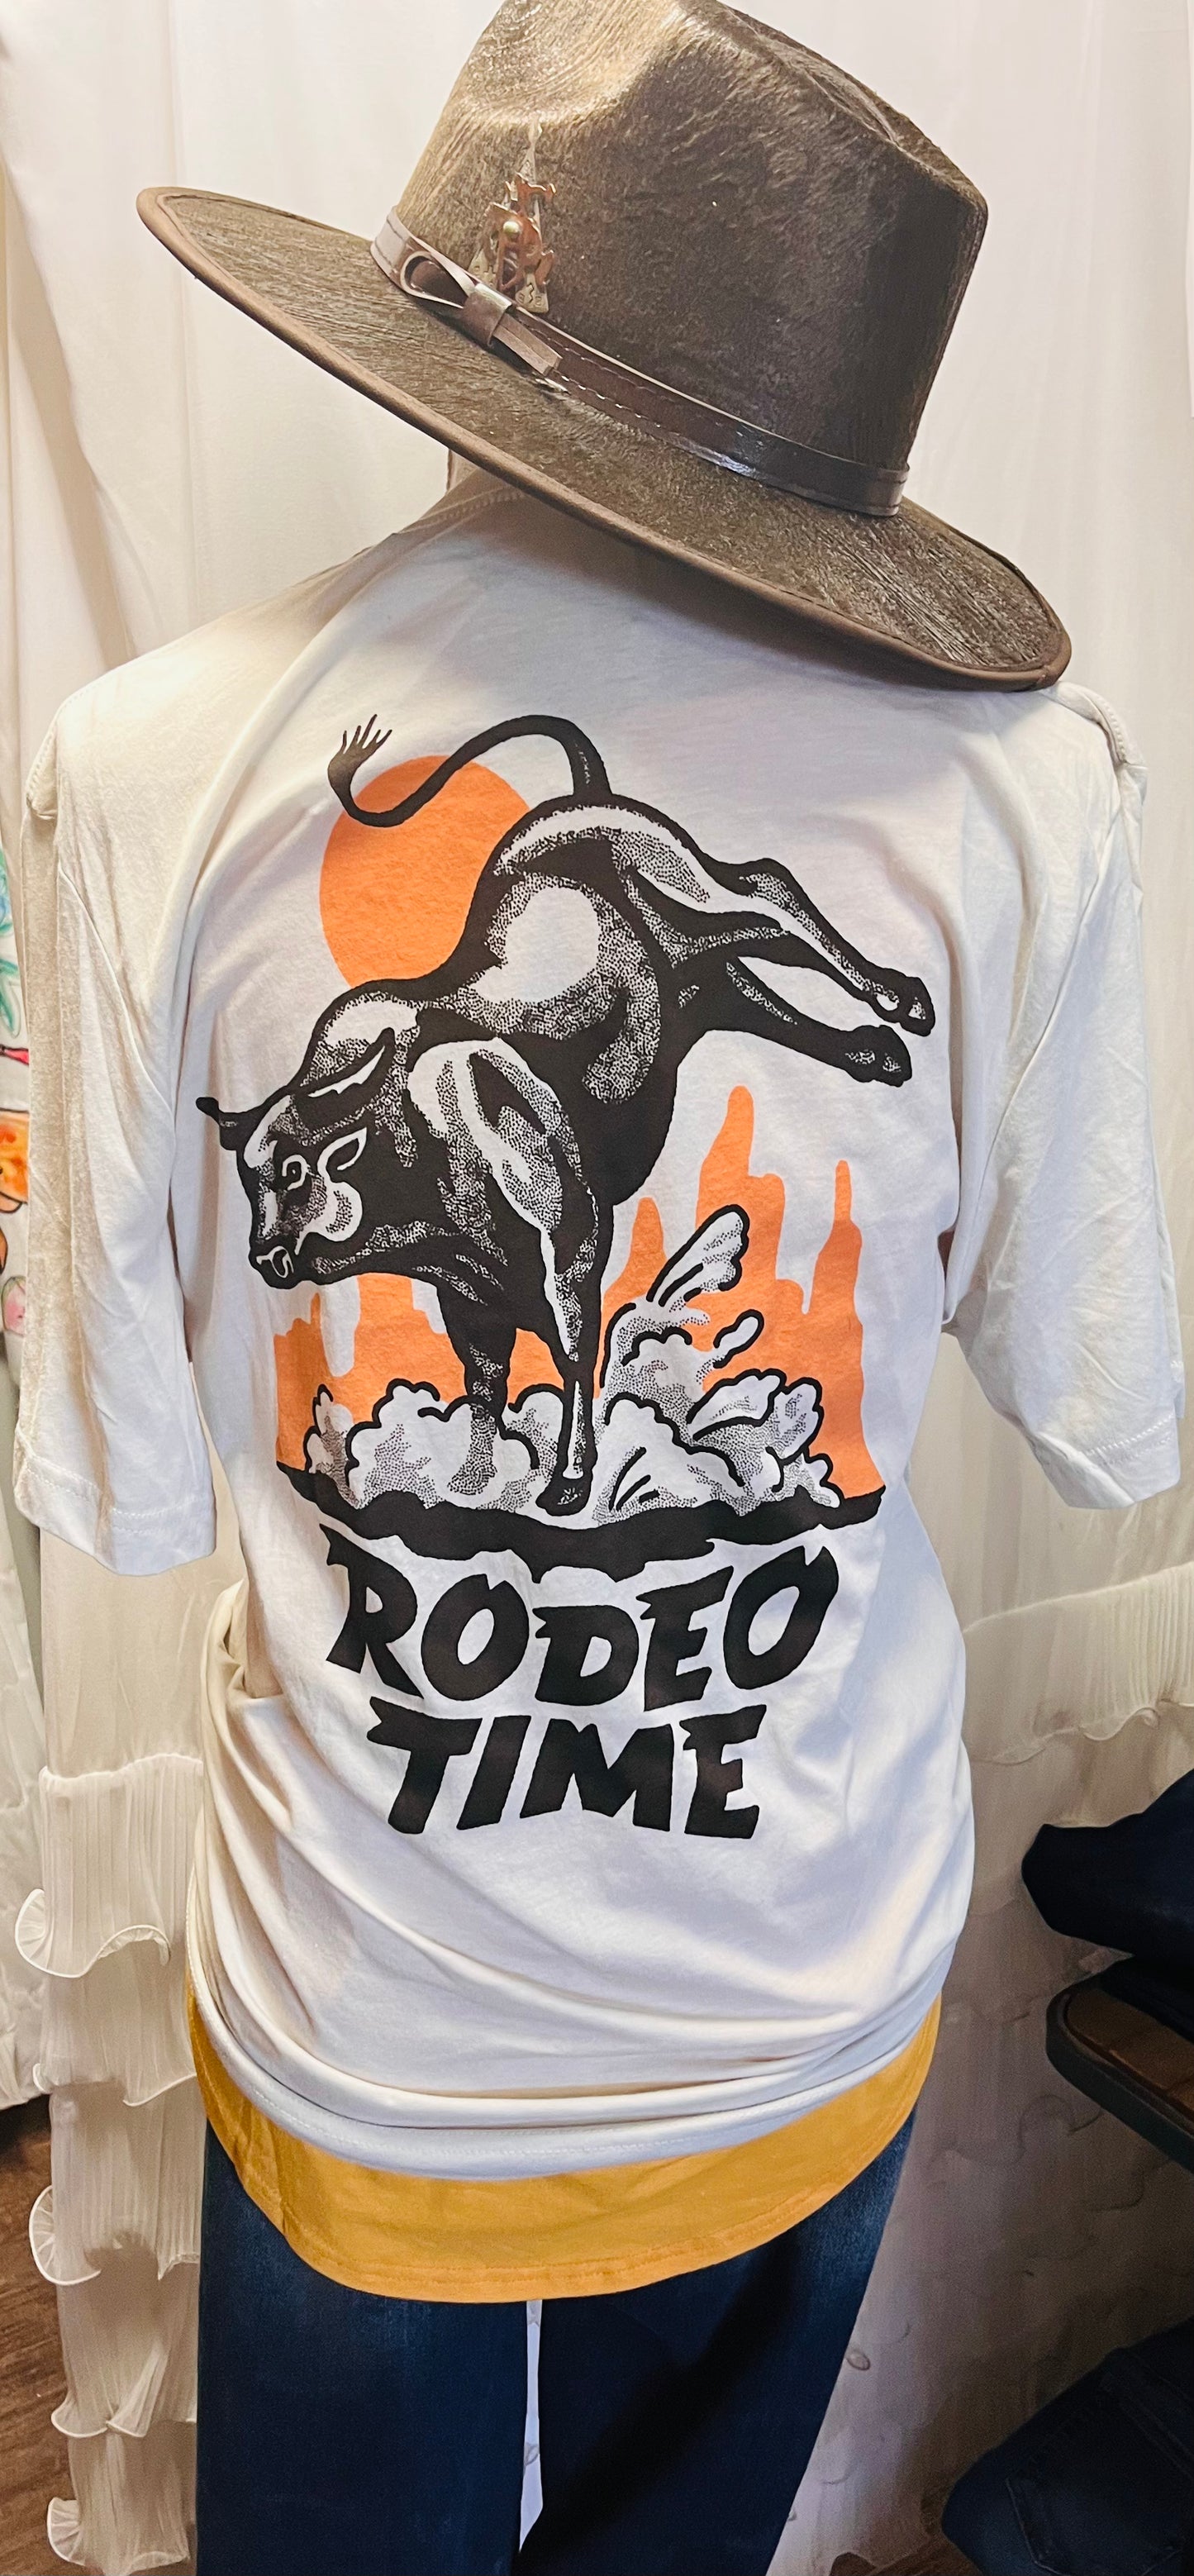 Rodeo time t-shirt Dale Brisby